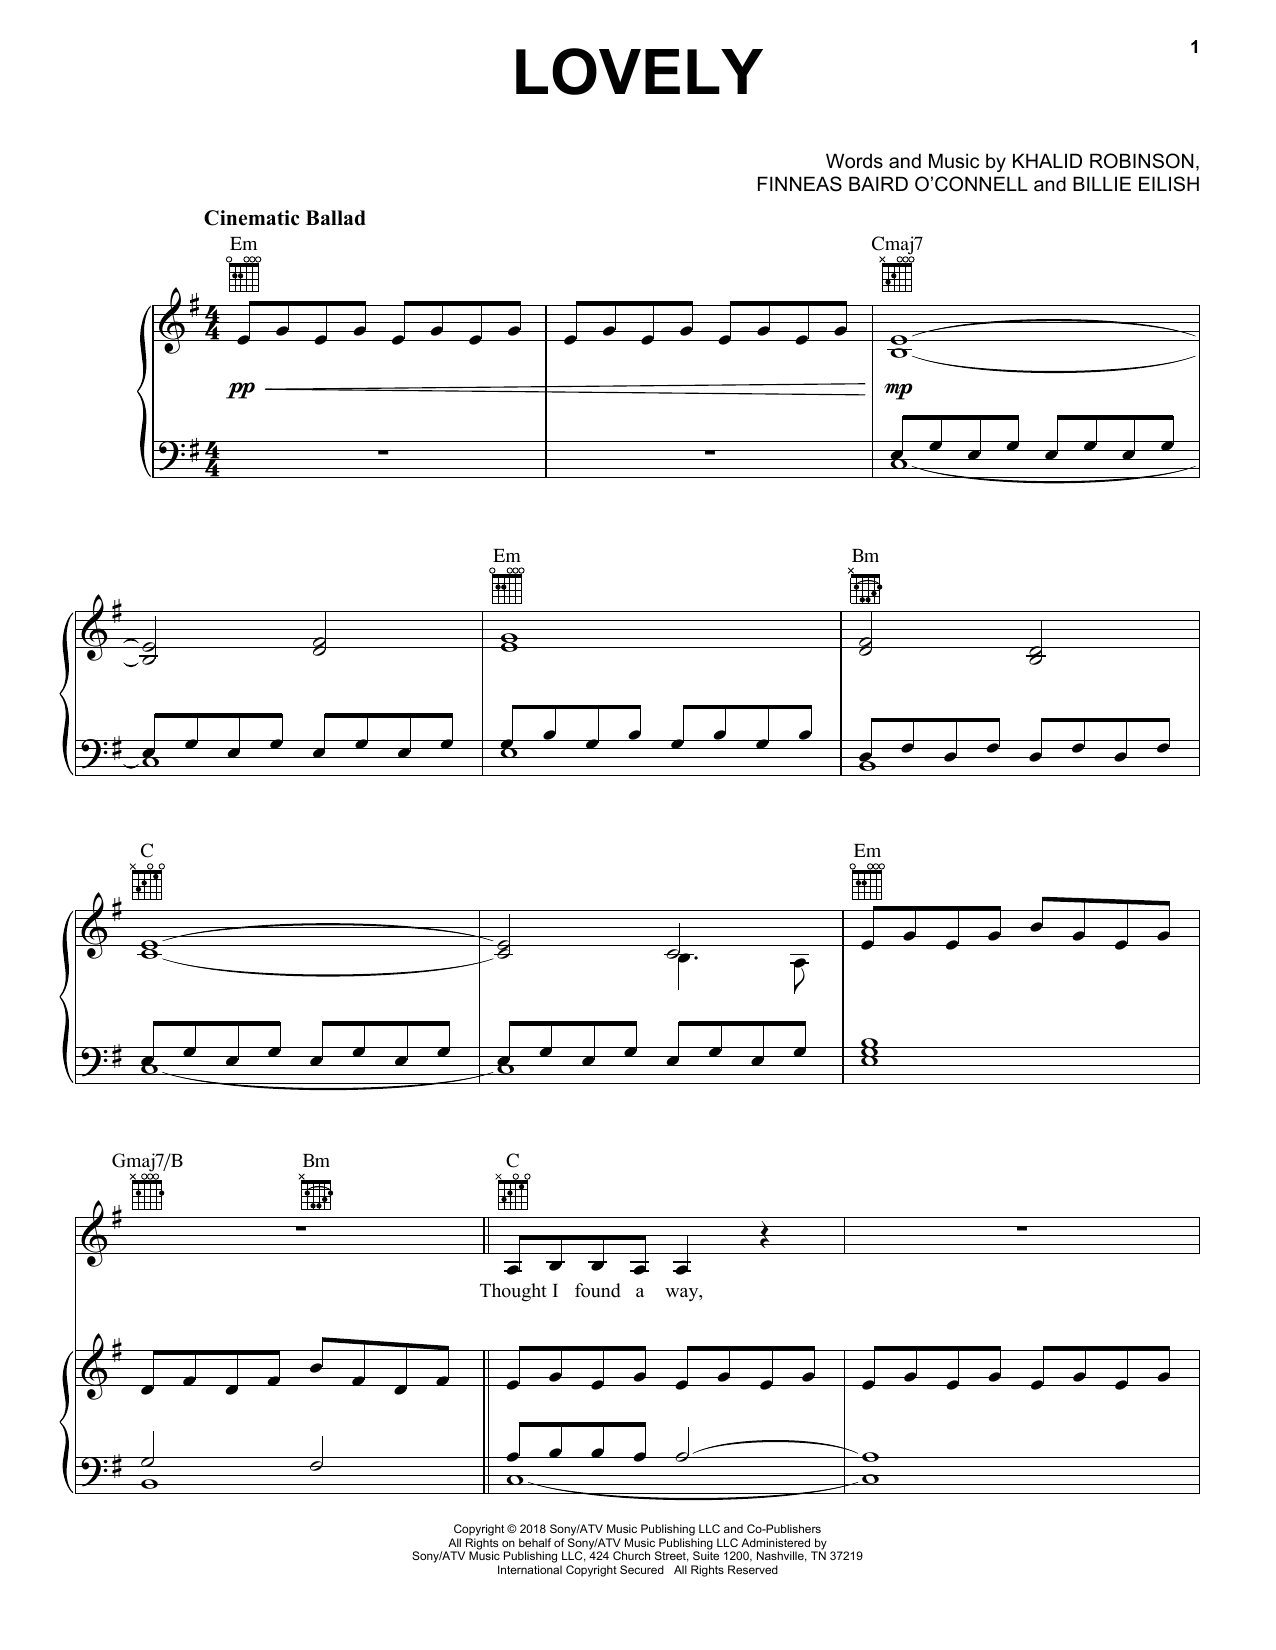 Billie Eilish & Khalid lovely (from 13 Reasons Why) sheet music notes and chords. Download Printable PDF.